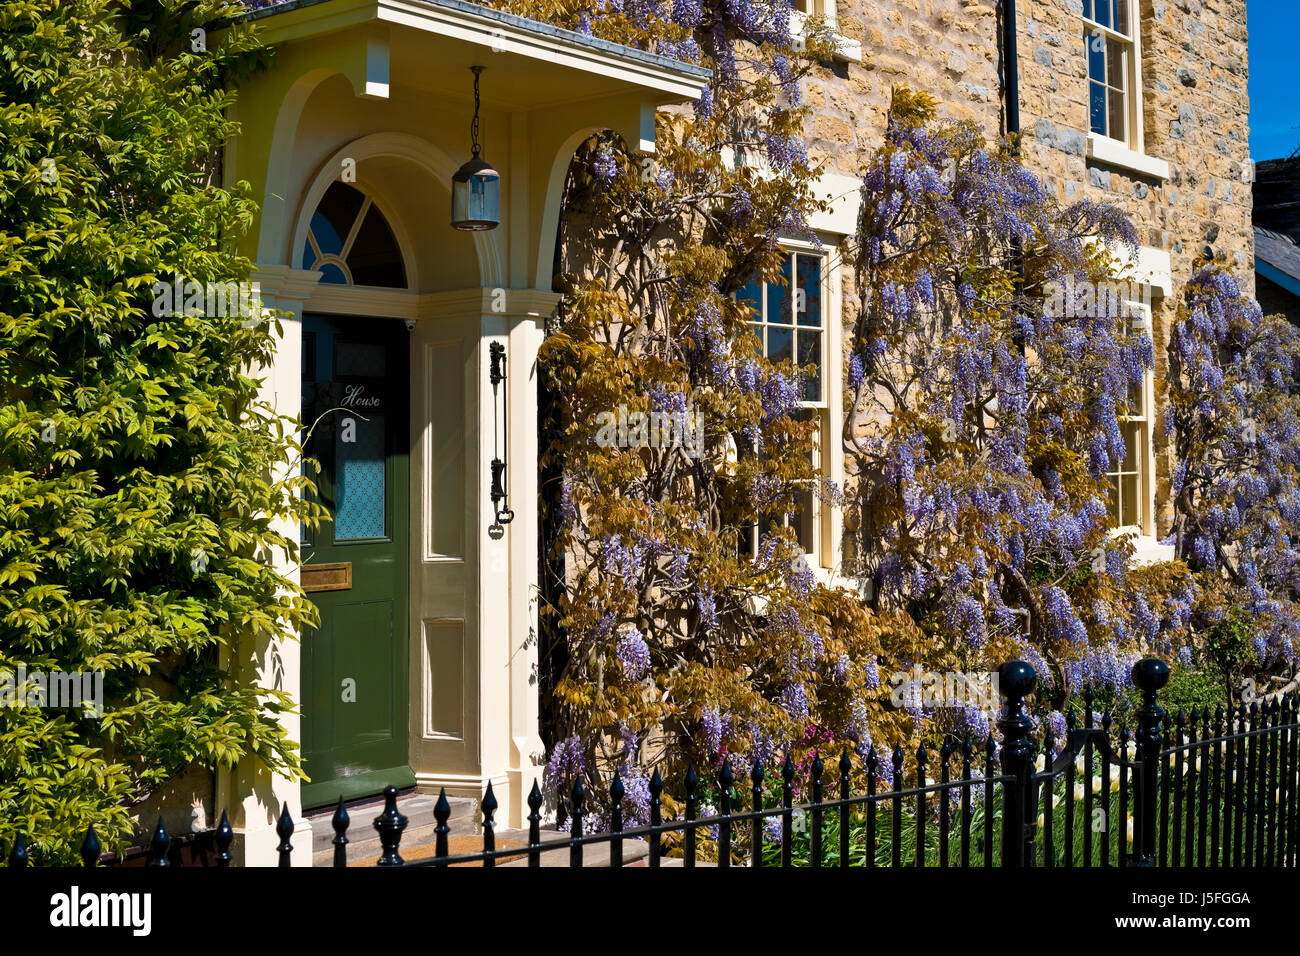 Purple Wisteria flowers flowering climber on the front of a house England UK United Kingdom GB Great Britain Stock Photo